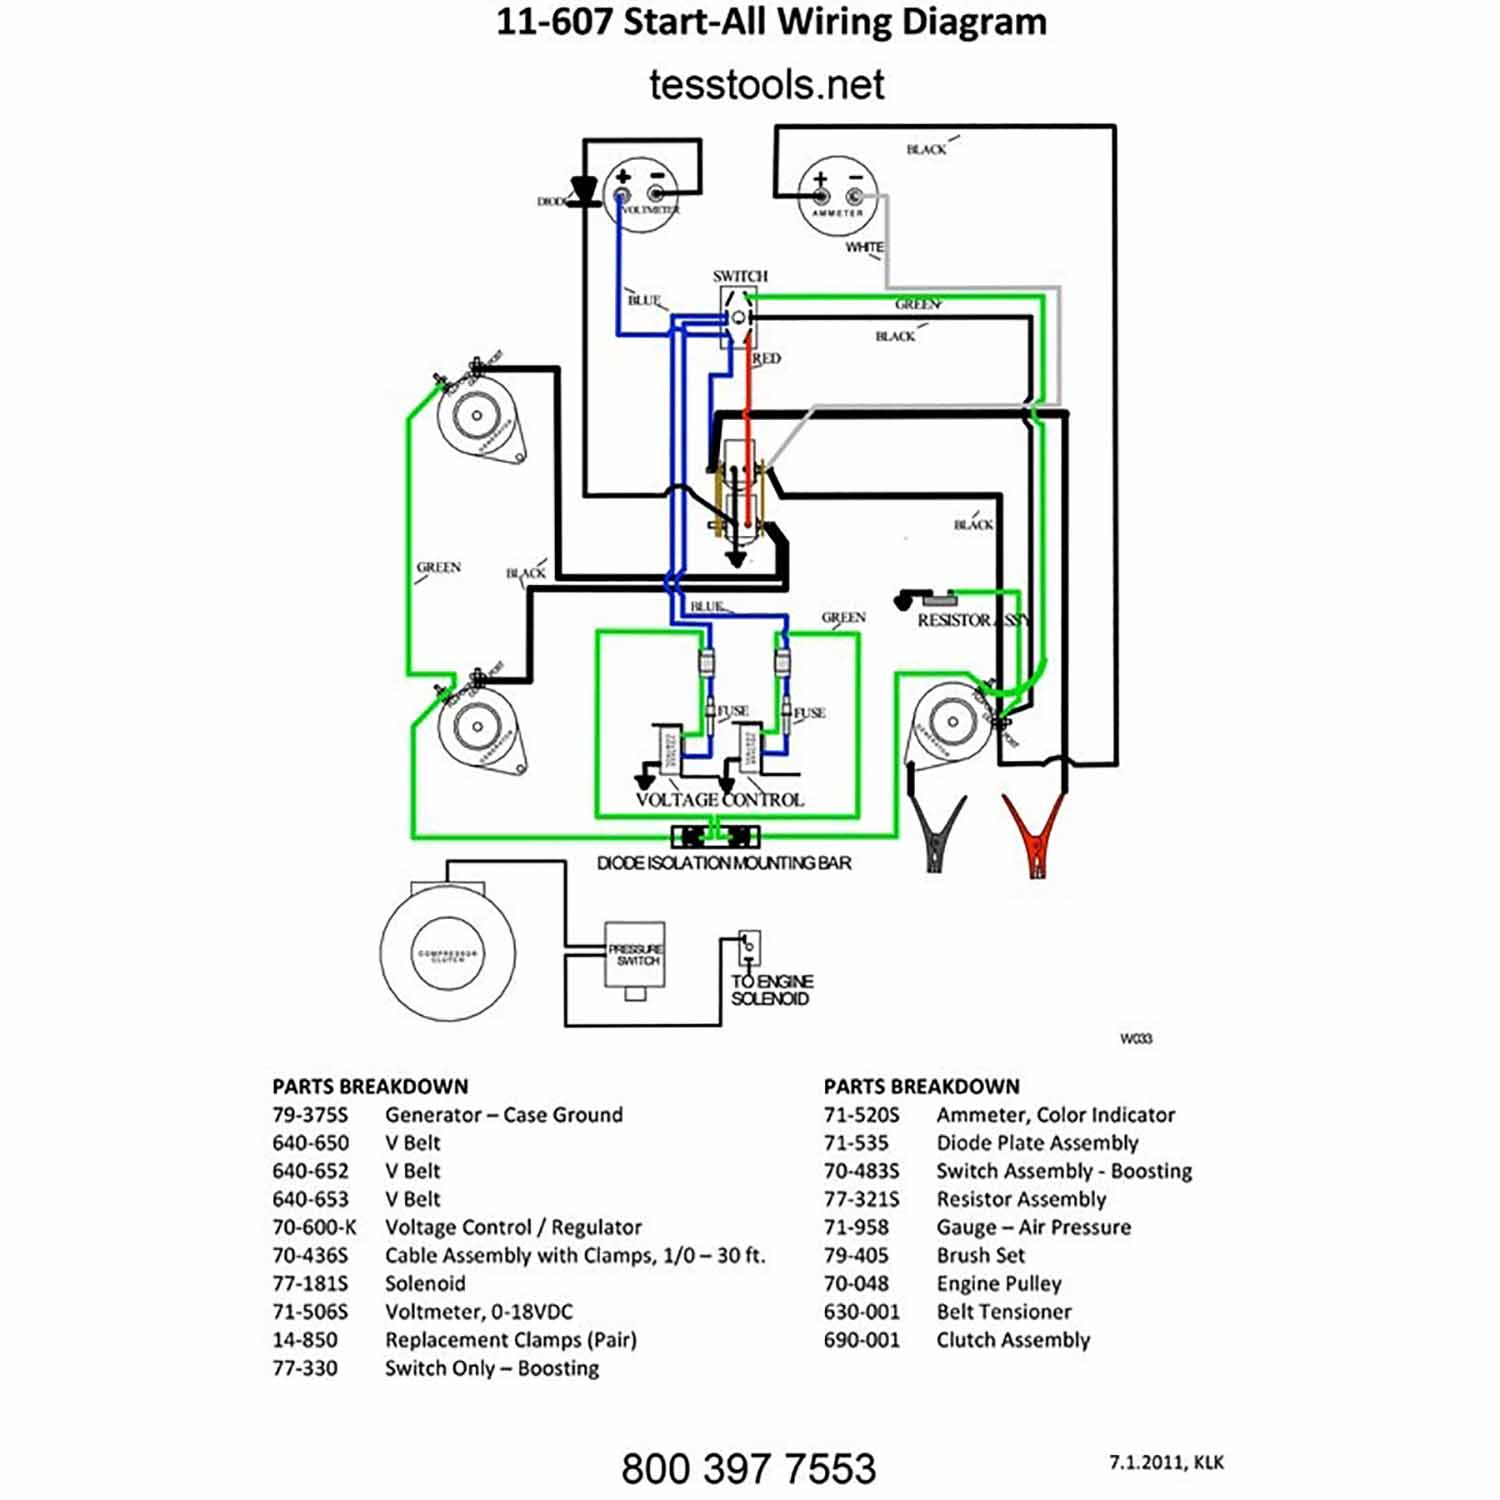 Good-All Model 11-607 Parts list,Wiring Diagram,Schematic ... dual 12v power schematic wiring diagram 